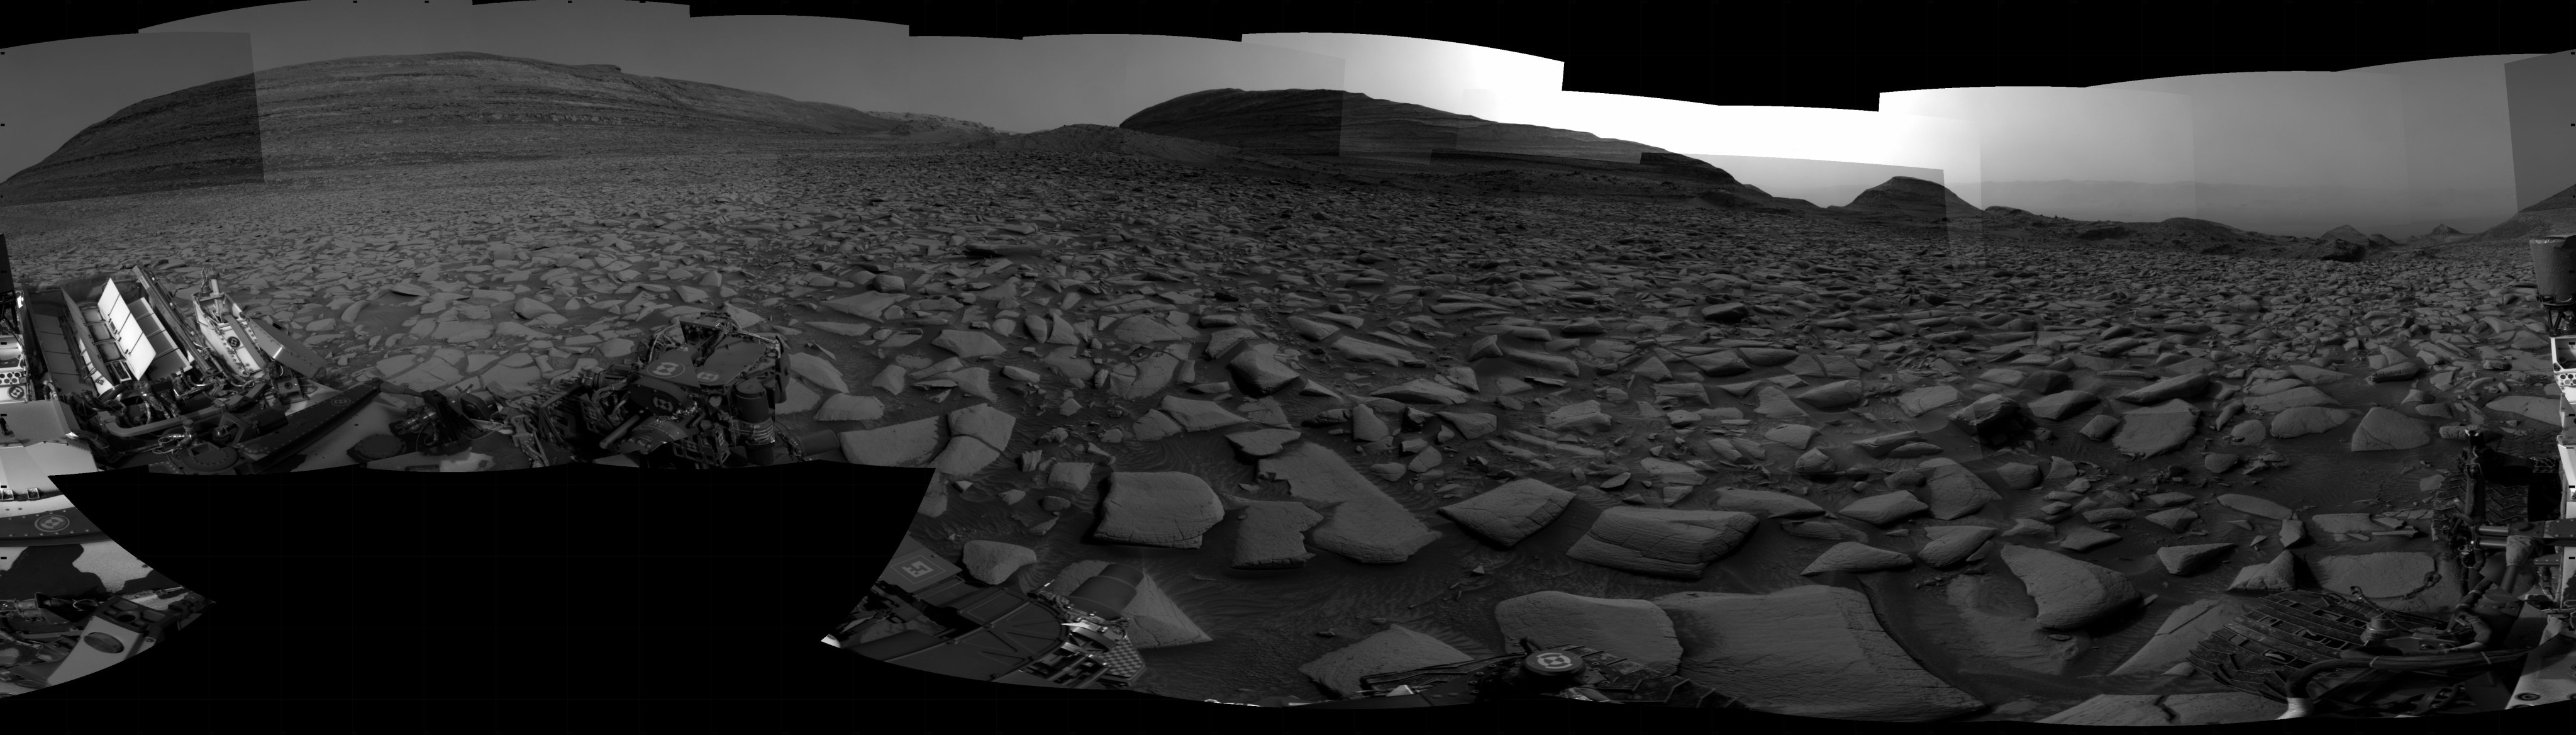 Curiosity took the images on April 09, 2024, Sols 4150-4148 of the Mars Science Laboratory mission at drive 1990, site number 106. The local mean solar time for the image exposures was from 3 PM to 12 PM.